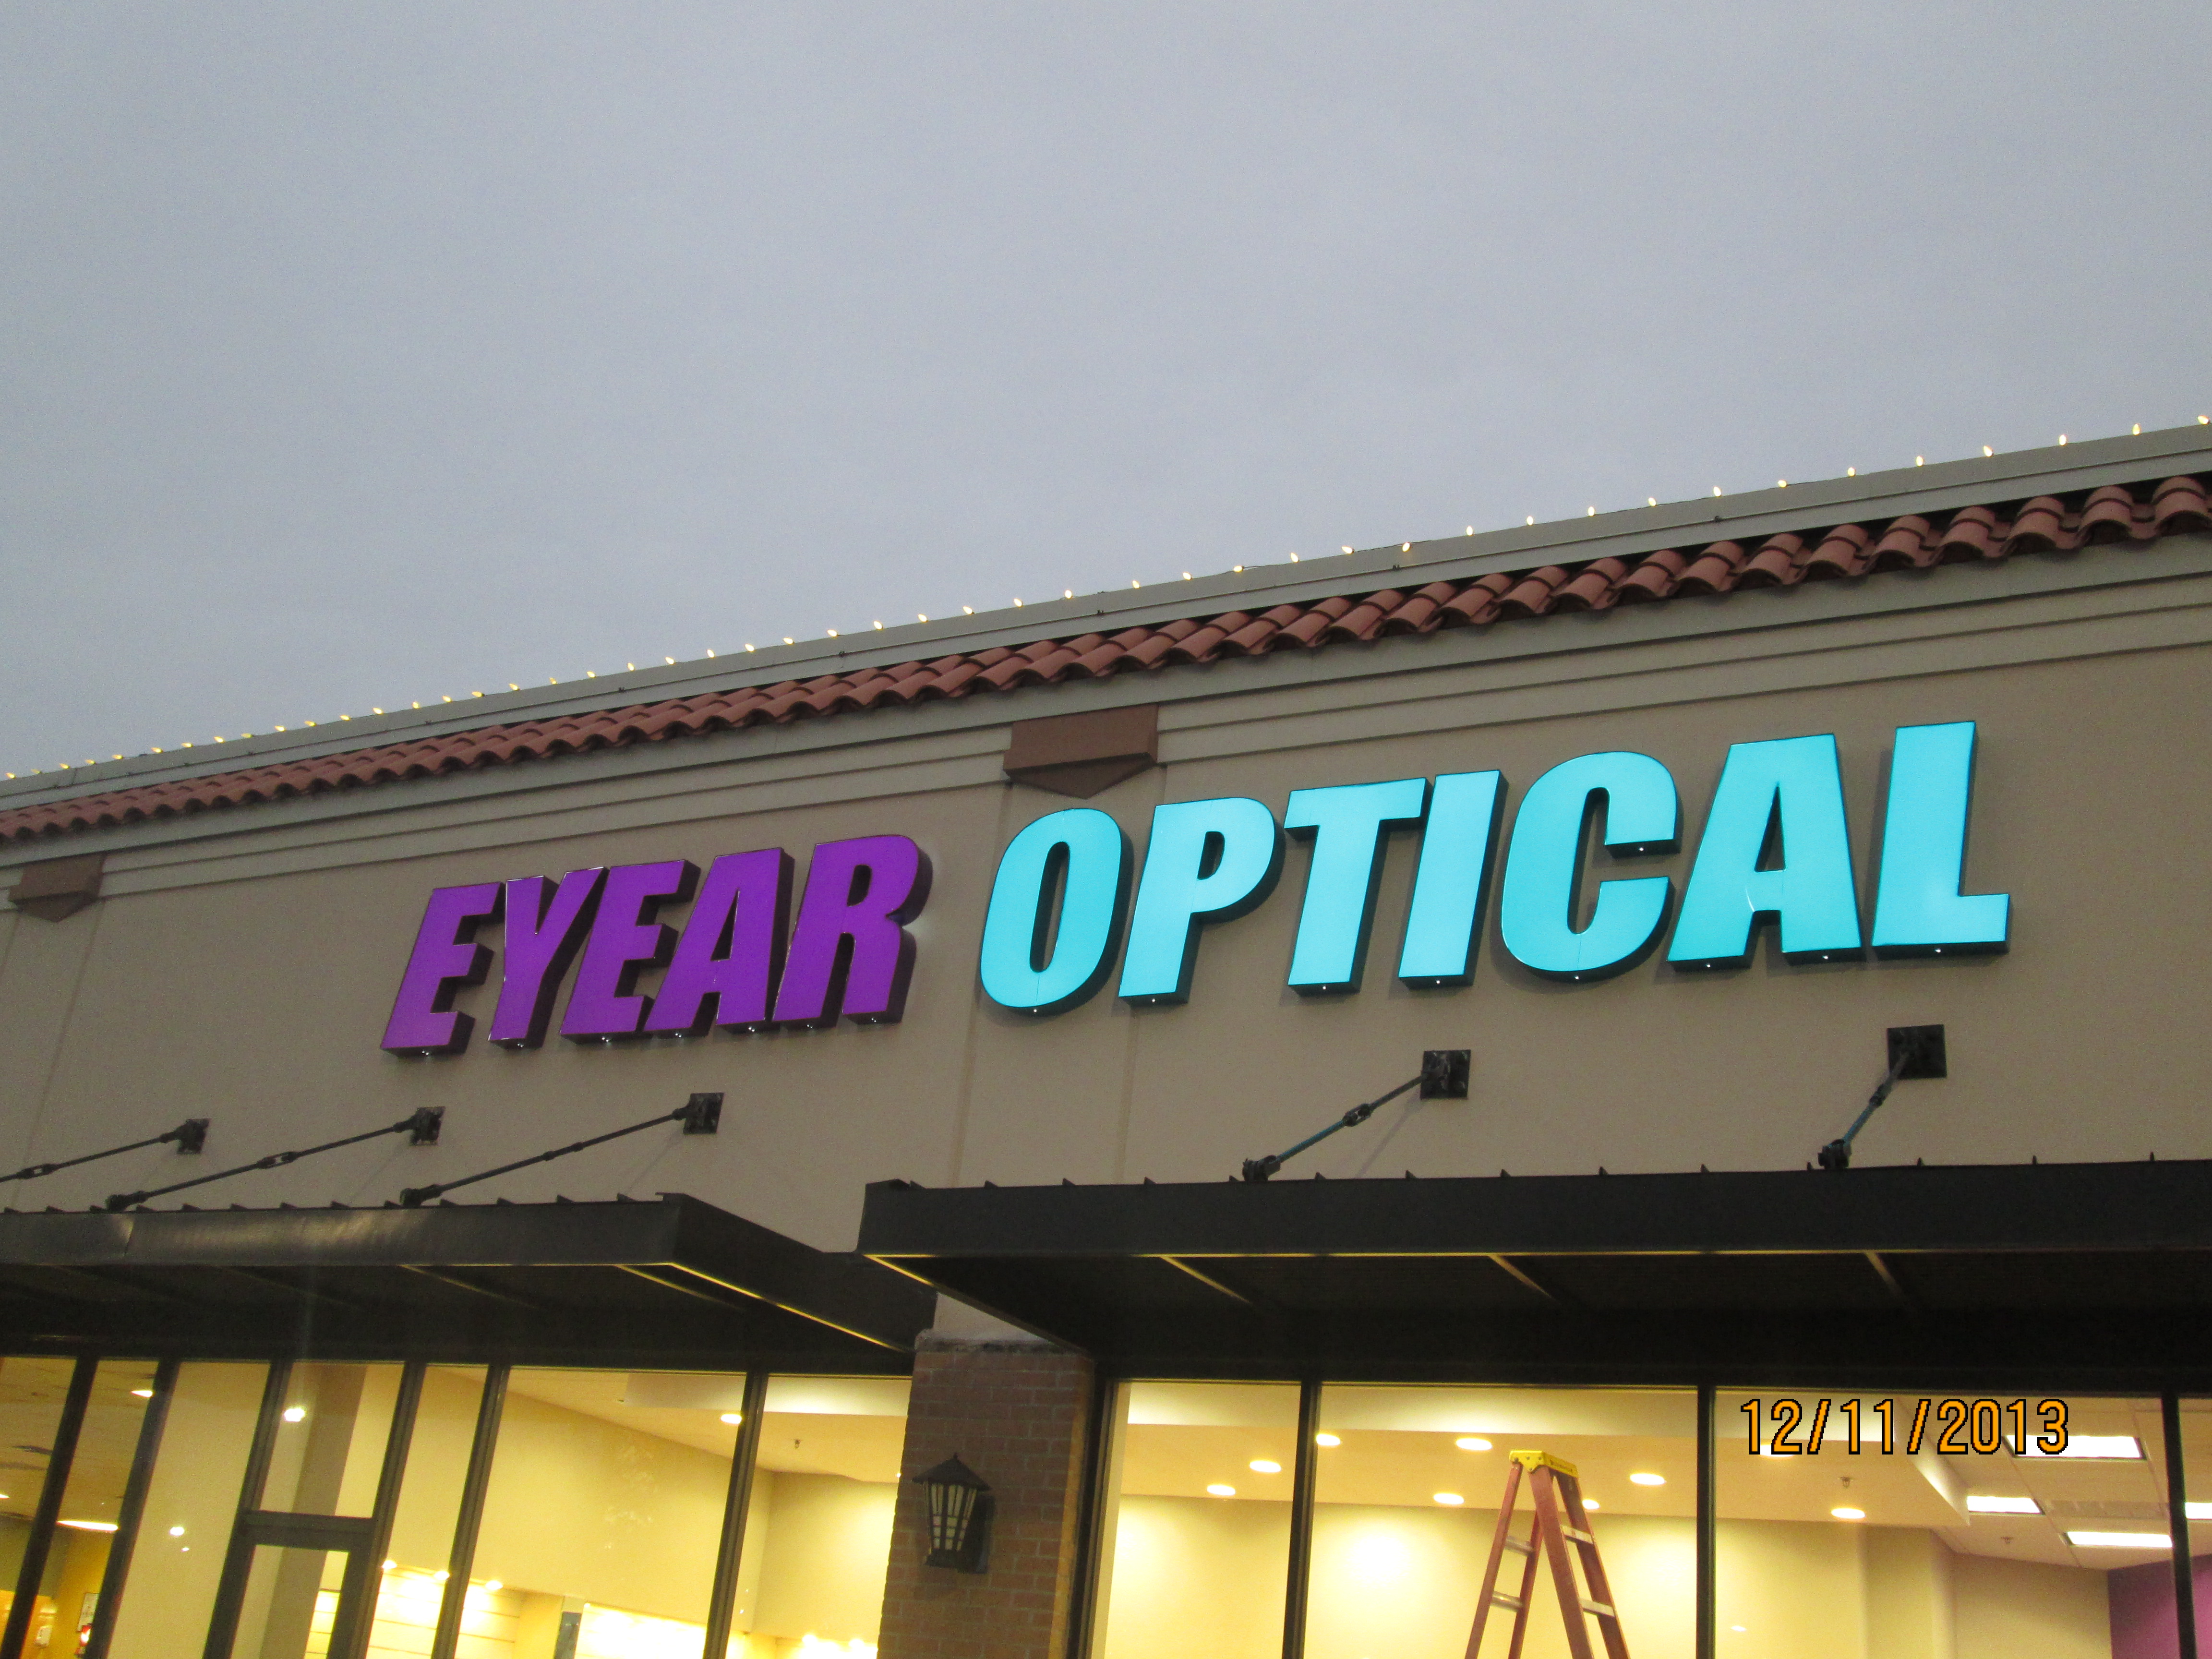 Enhanced Eye Ear Optical's facade with striking illuminated signage for optimal visibility and brand distinction.